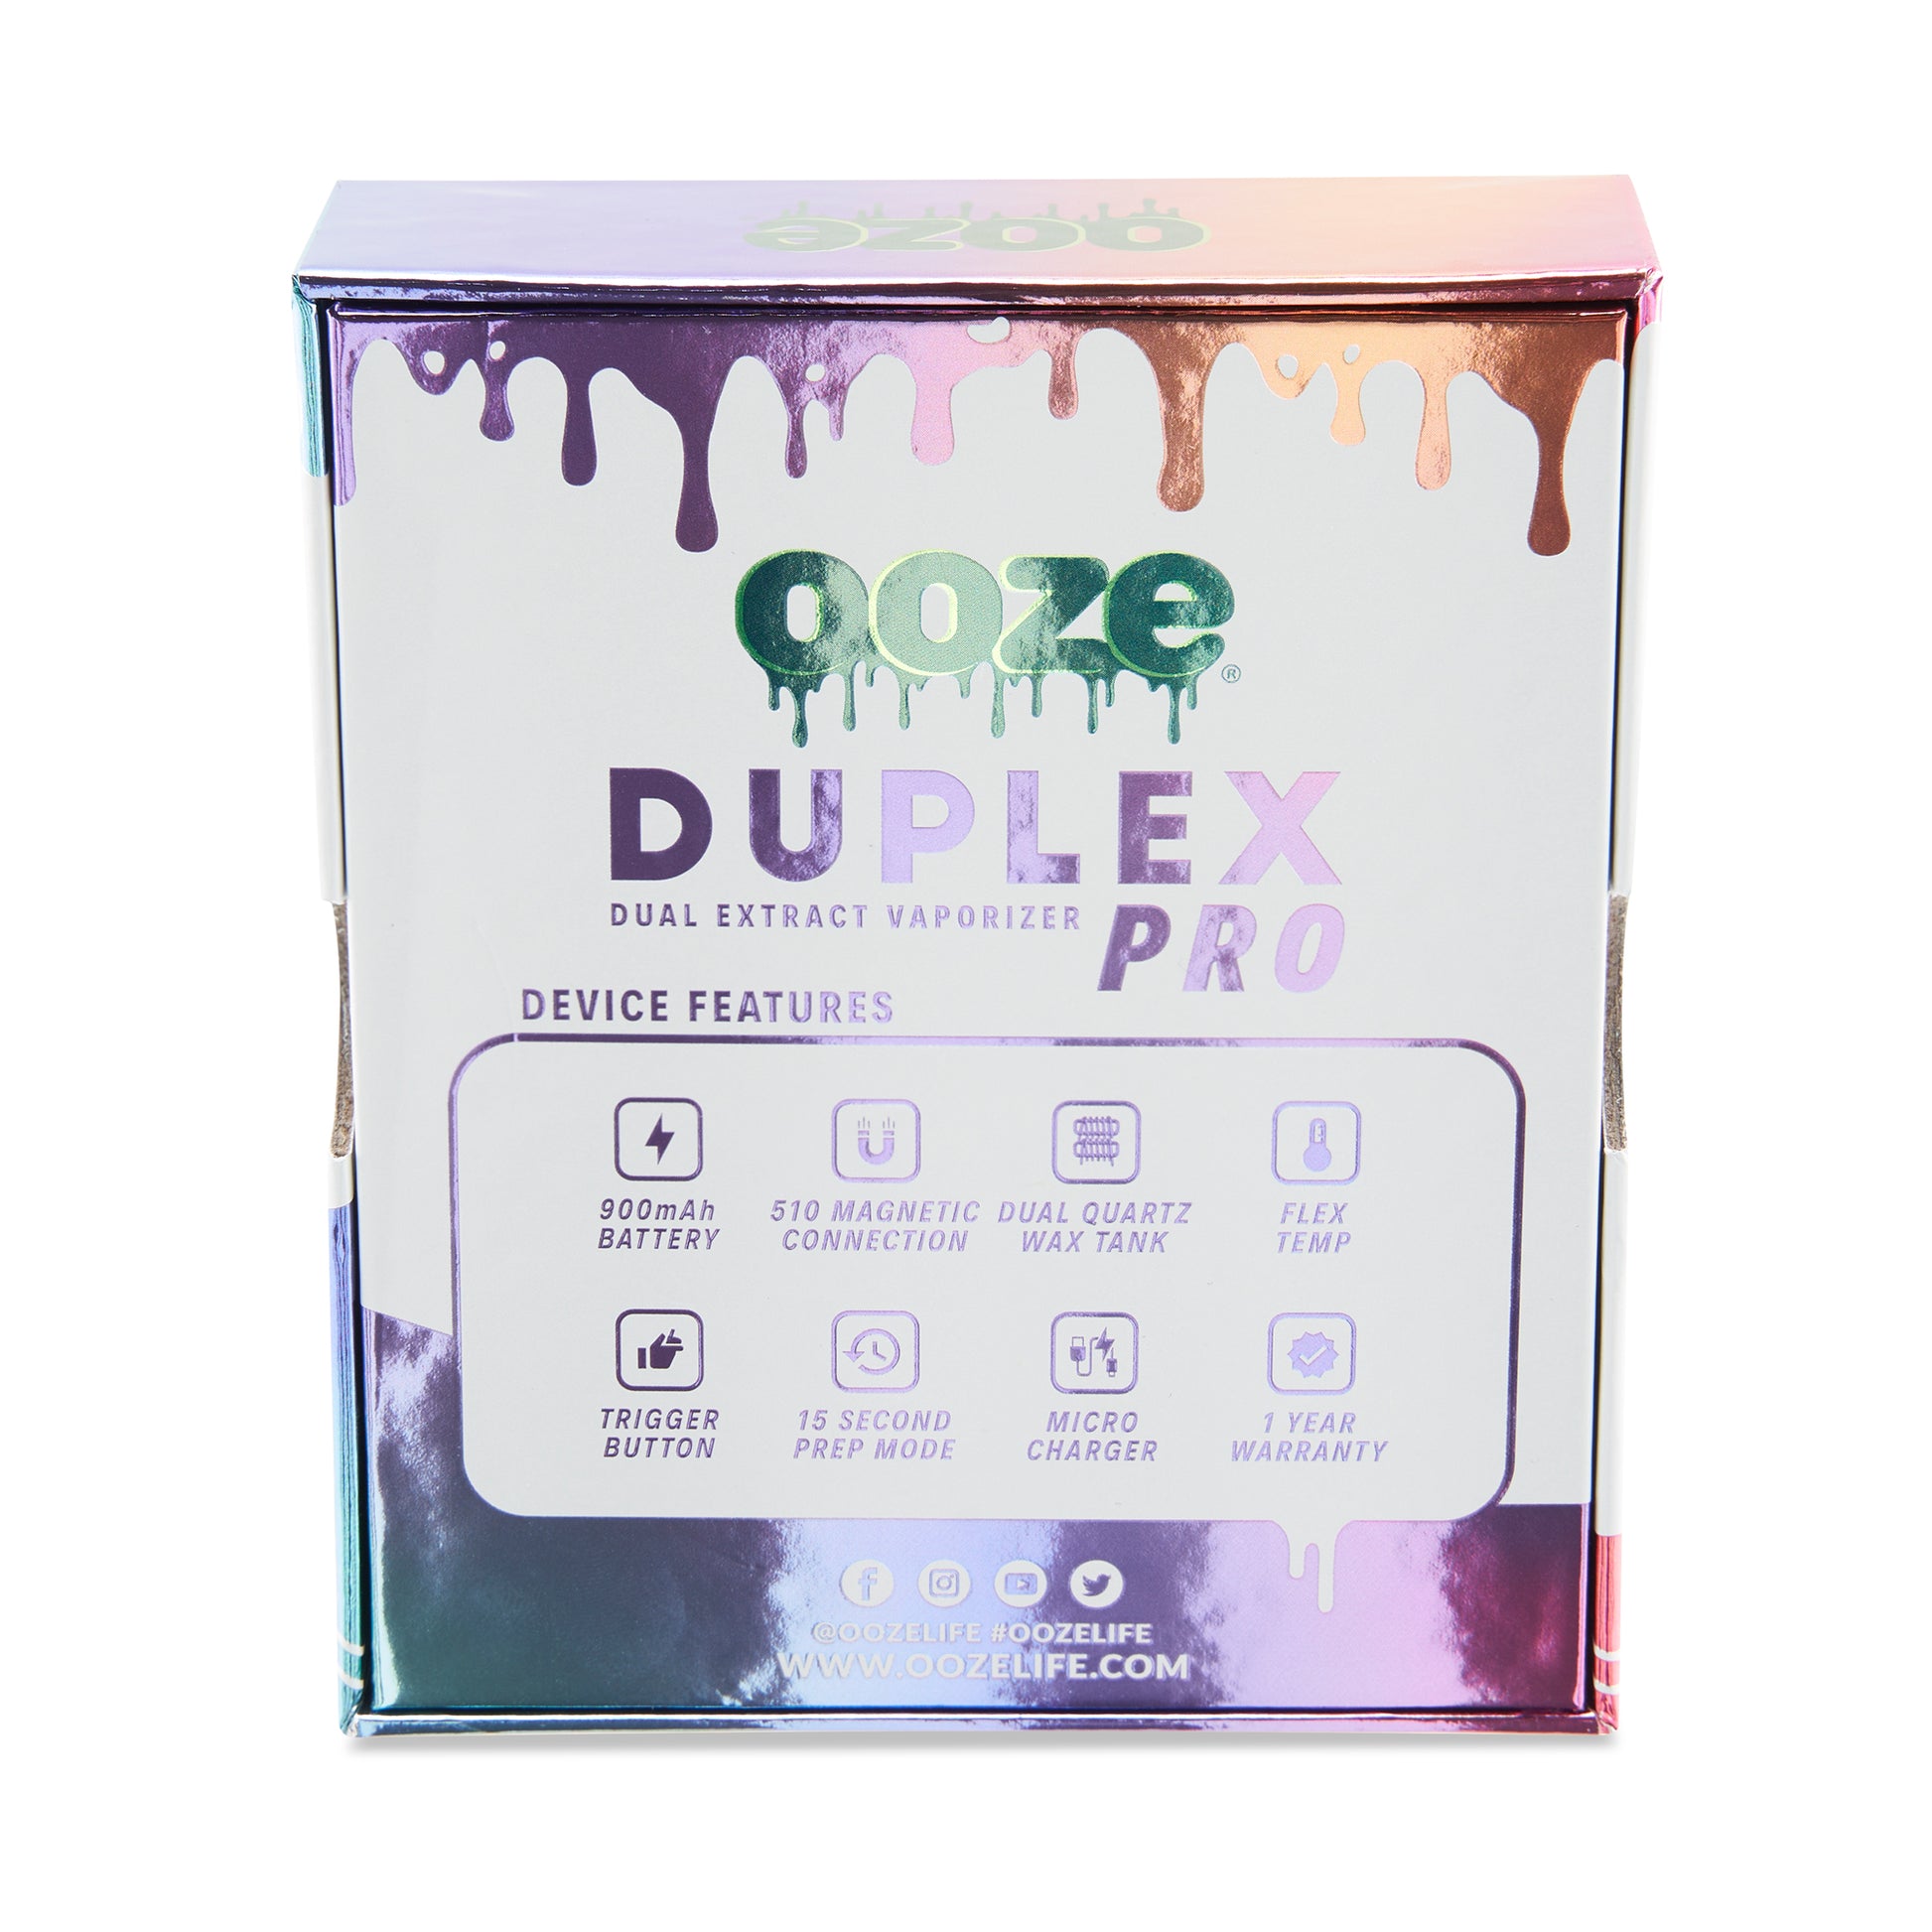 The back of the packaging for The Rainbow Ooze Duplex Pro Vaporizer.